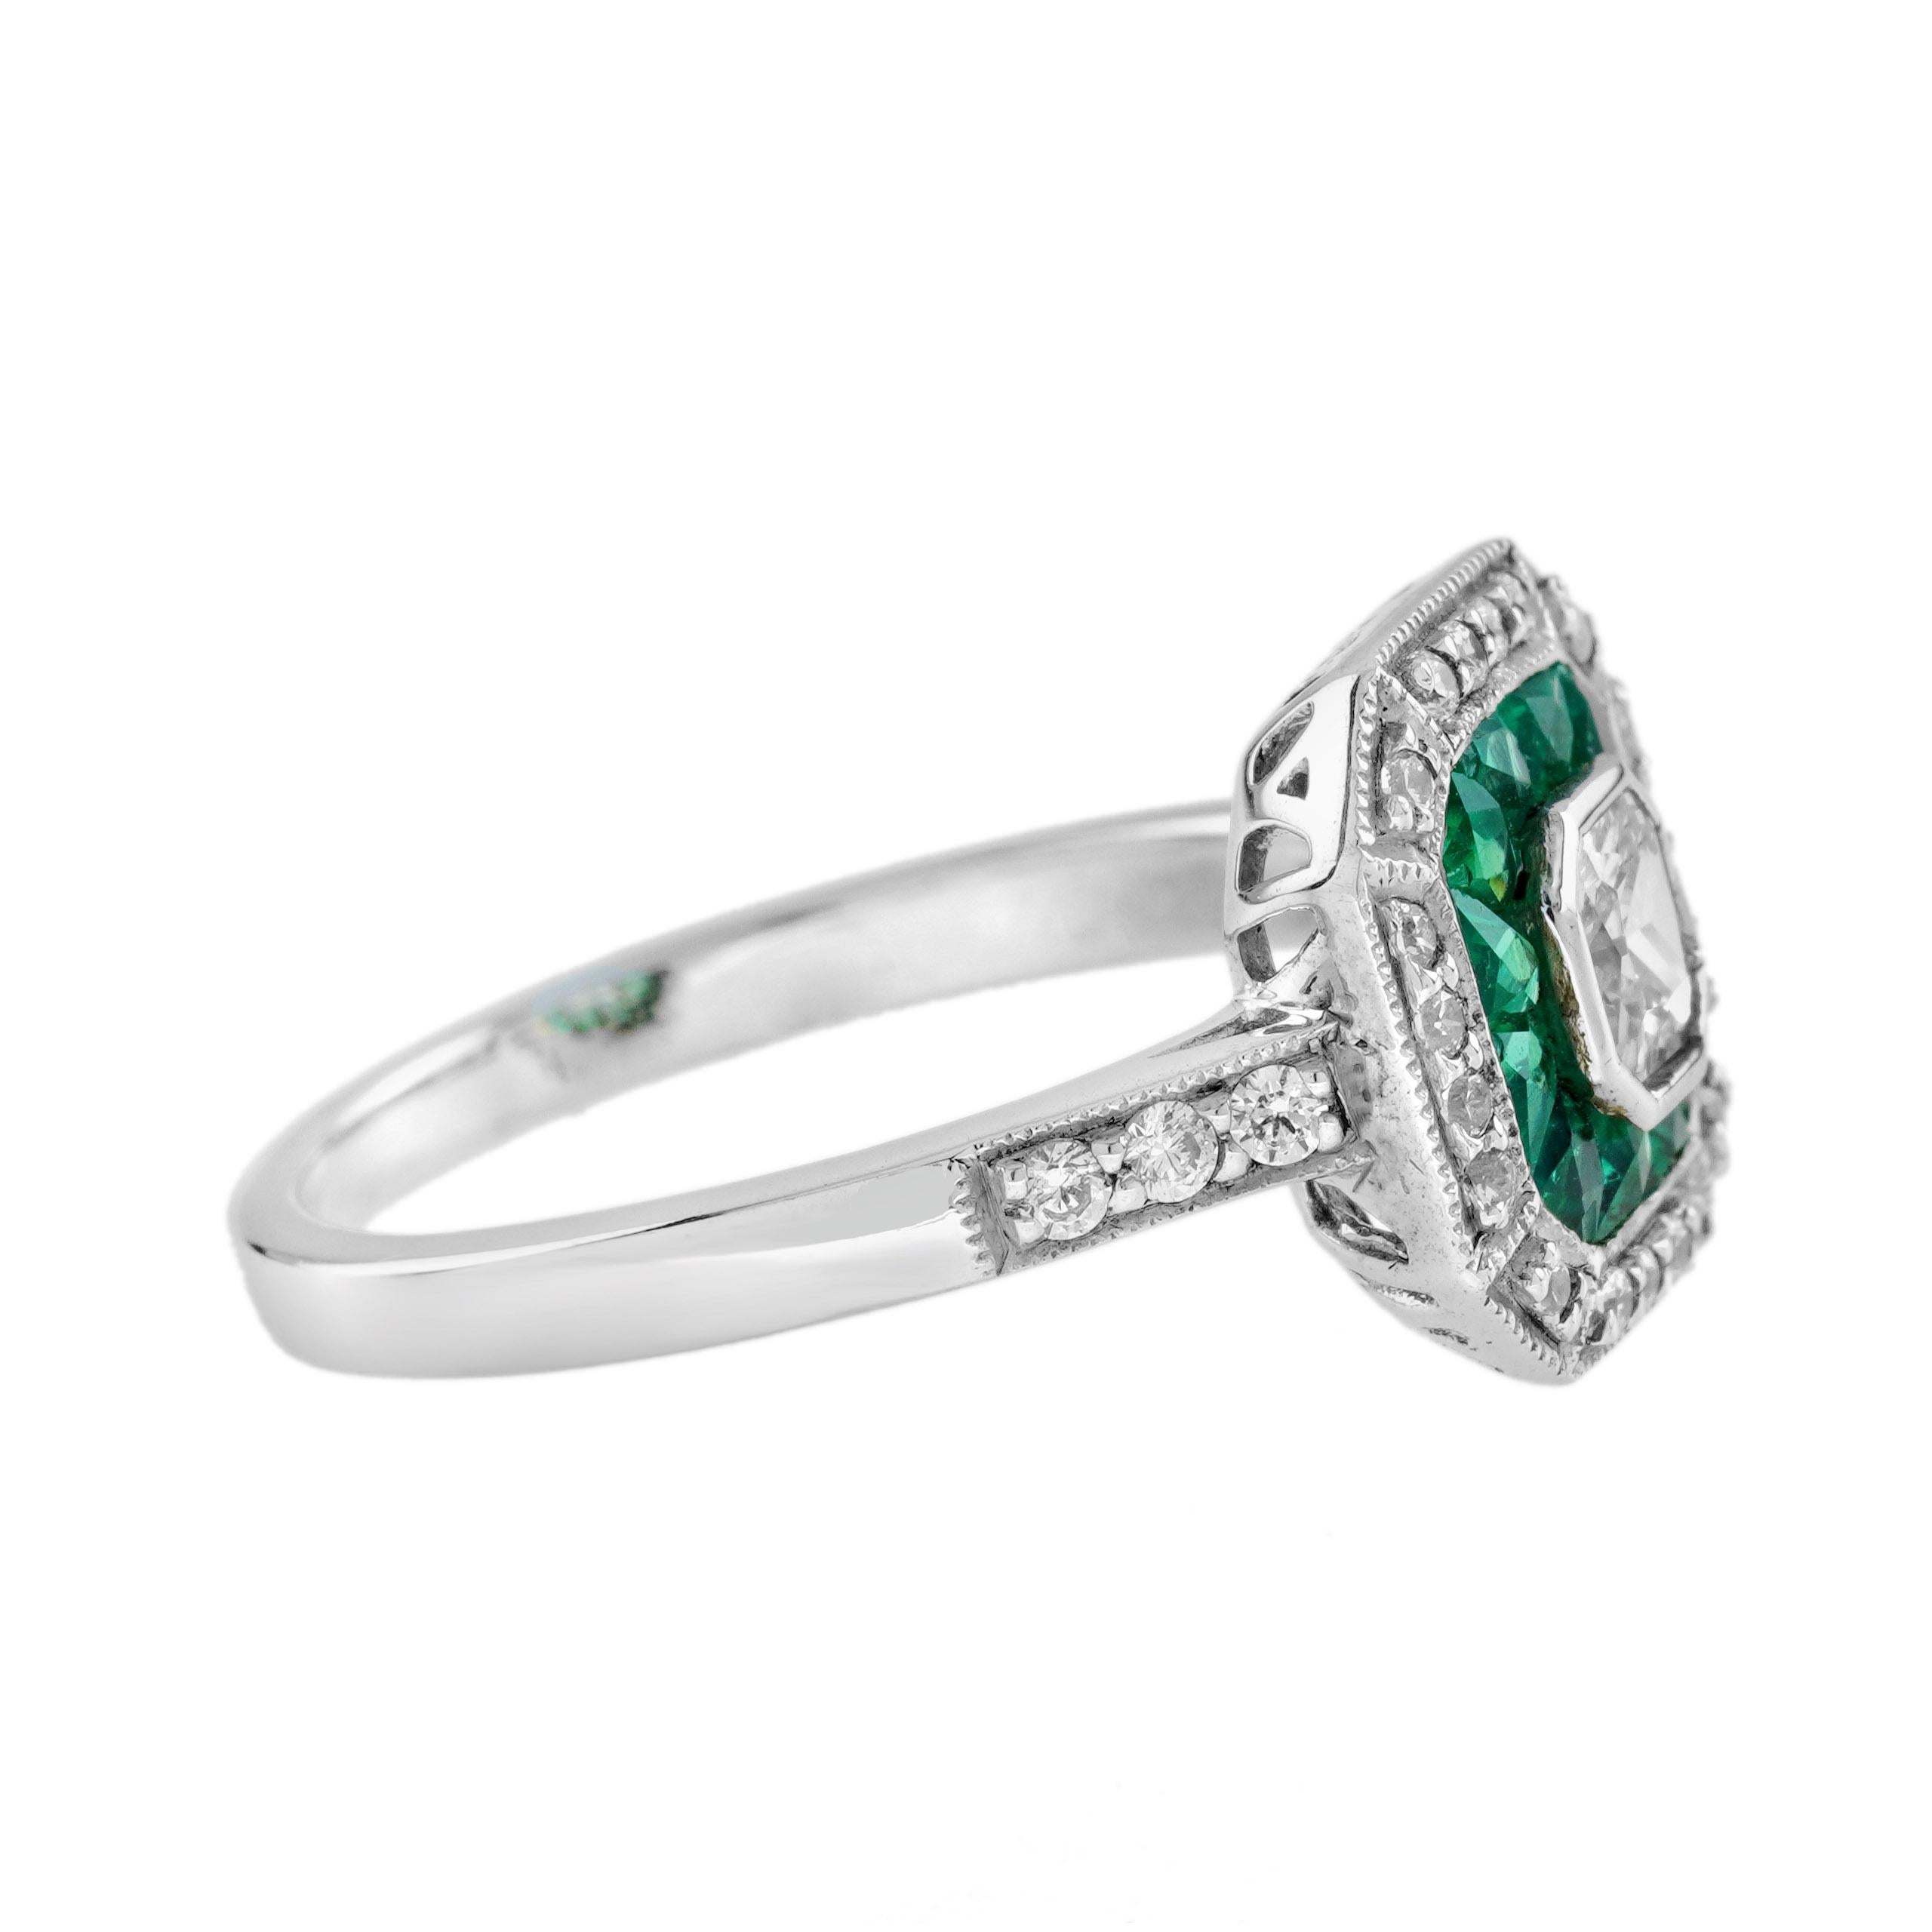 For Sale:  Diamond and Emerald Double Halo Art Deco Style Engagement Ring in 18K White Gold 4